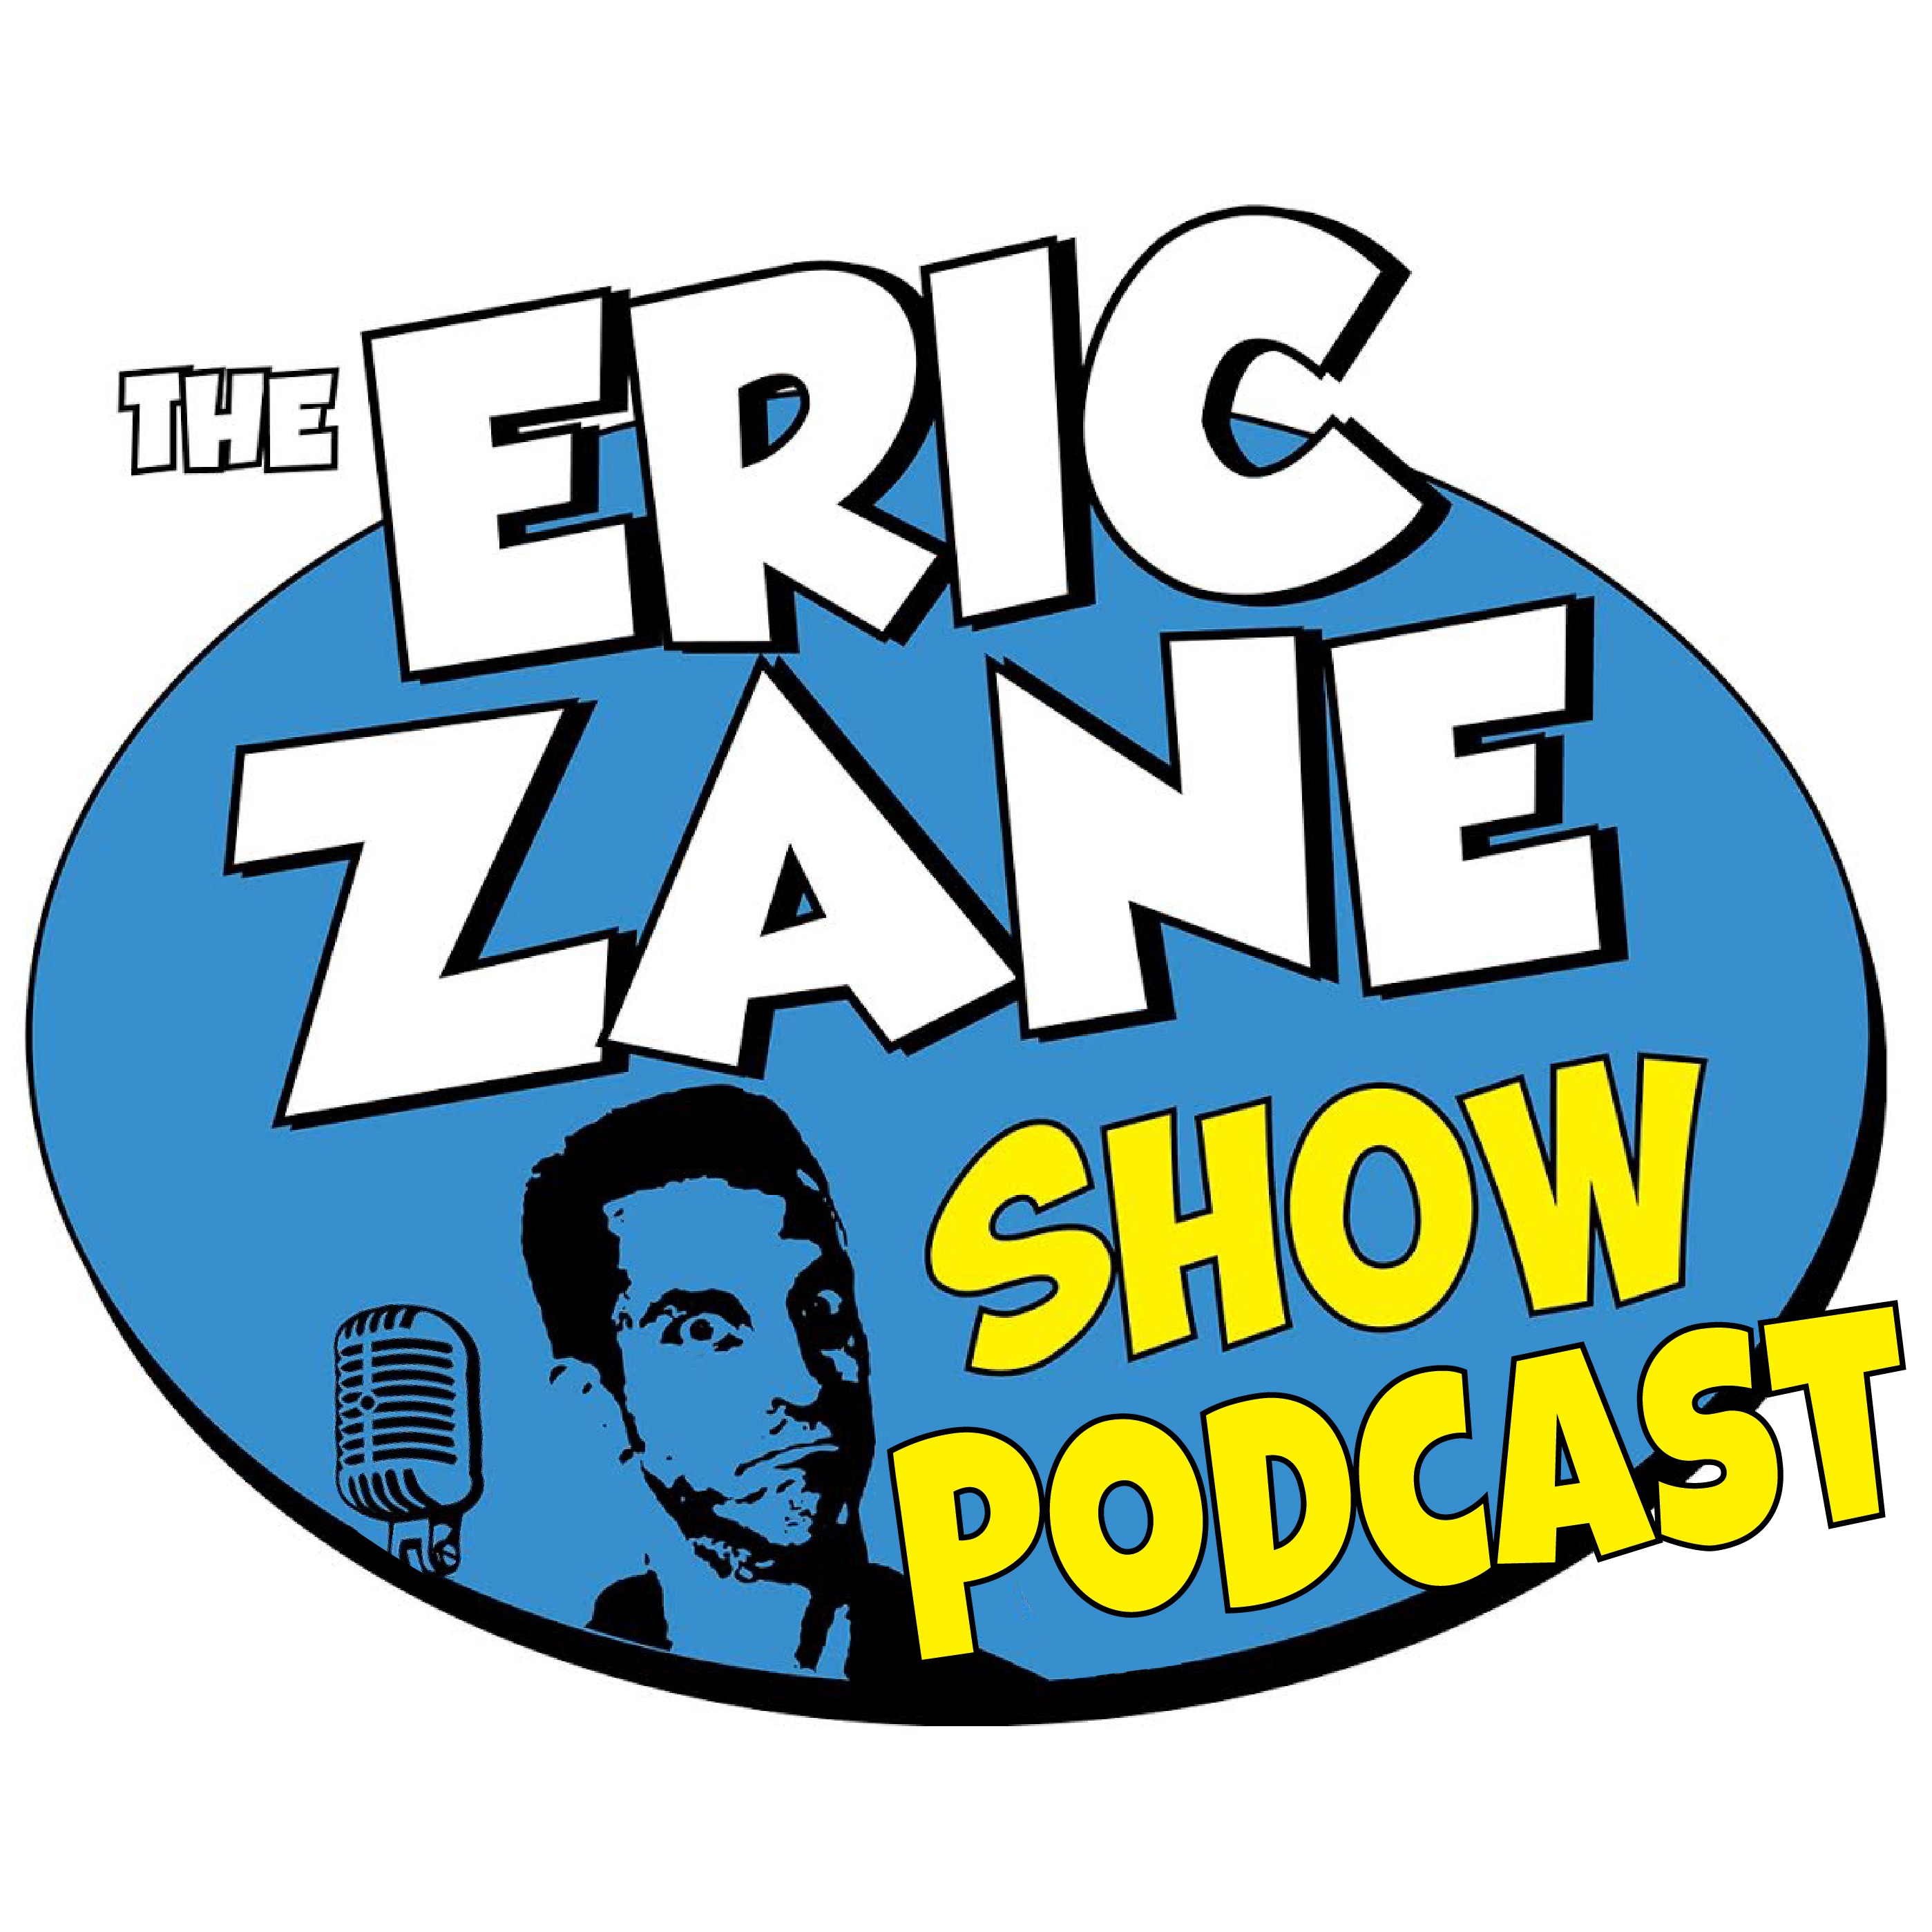 Eric Zane Show Podcast 996 - This lottery winner may make you mad